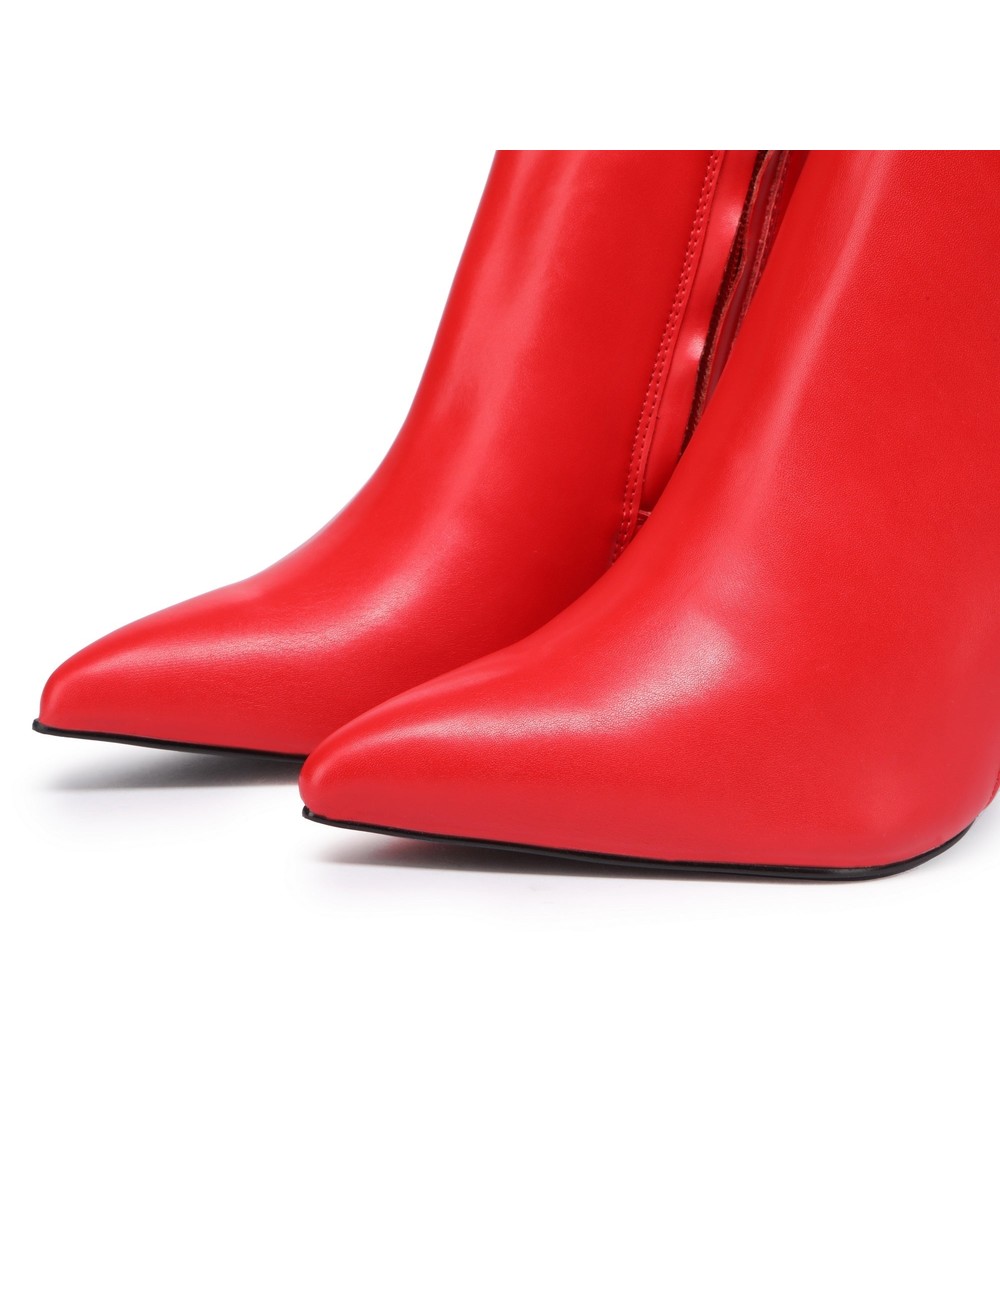 Giaro LEANDRA RED MATTE KNEE BOOTS - Giaro High Heels | Official store ...